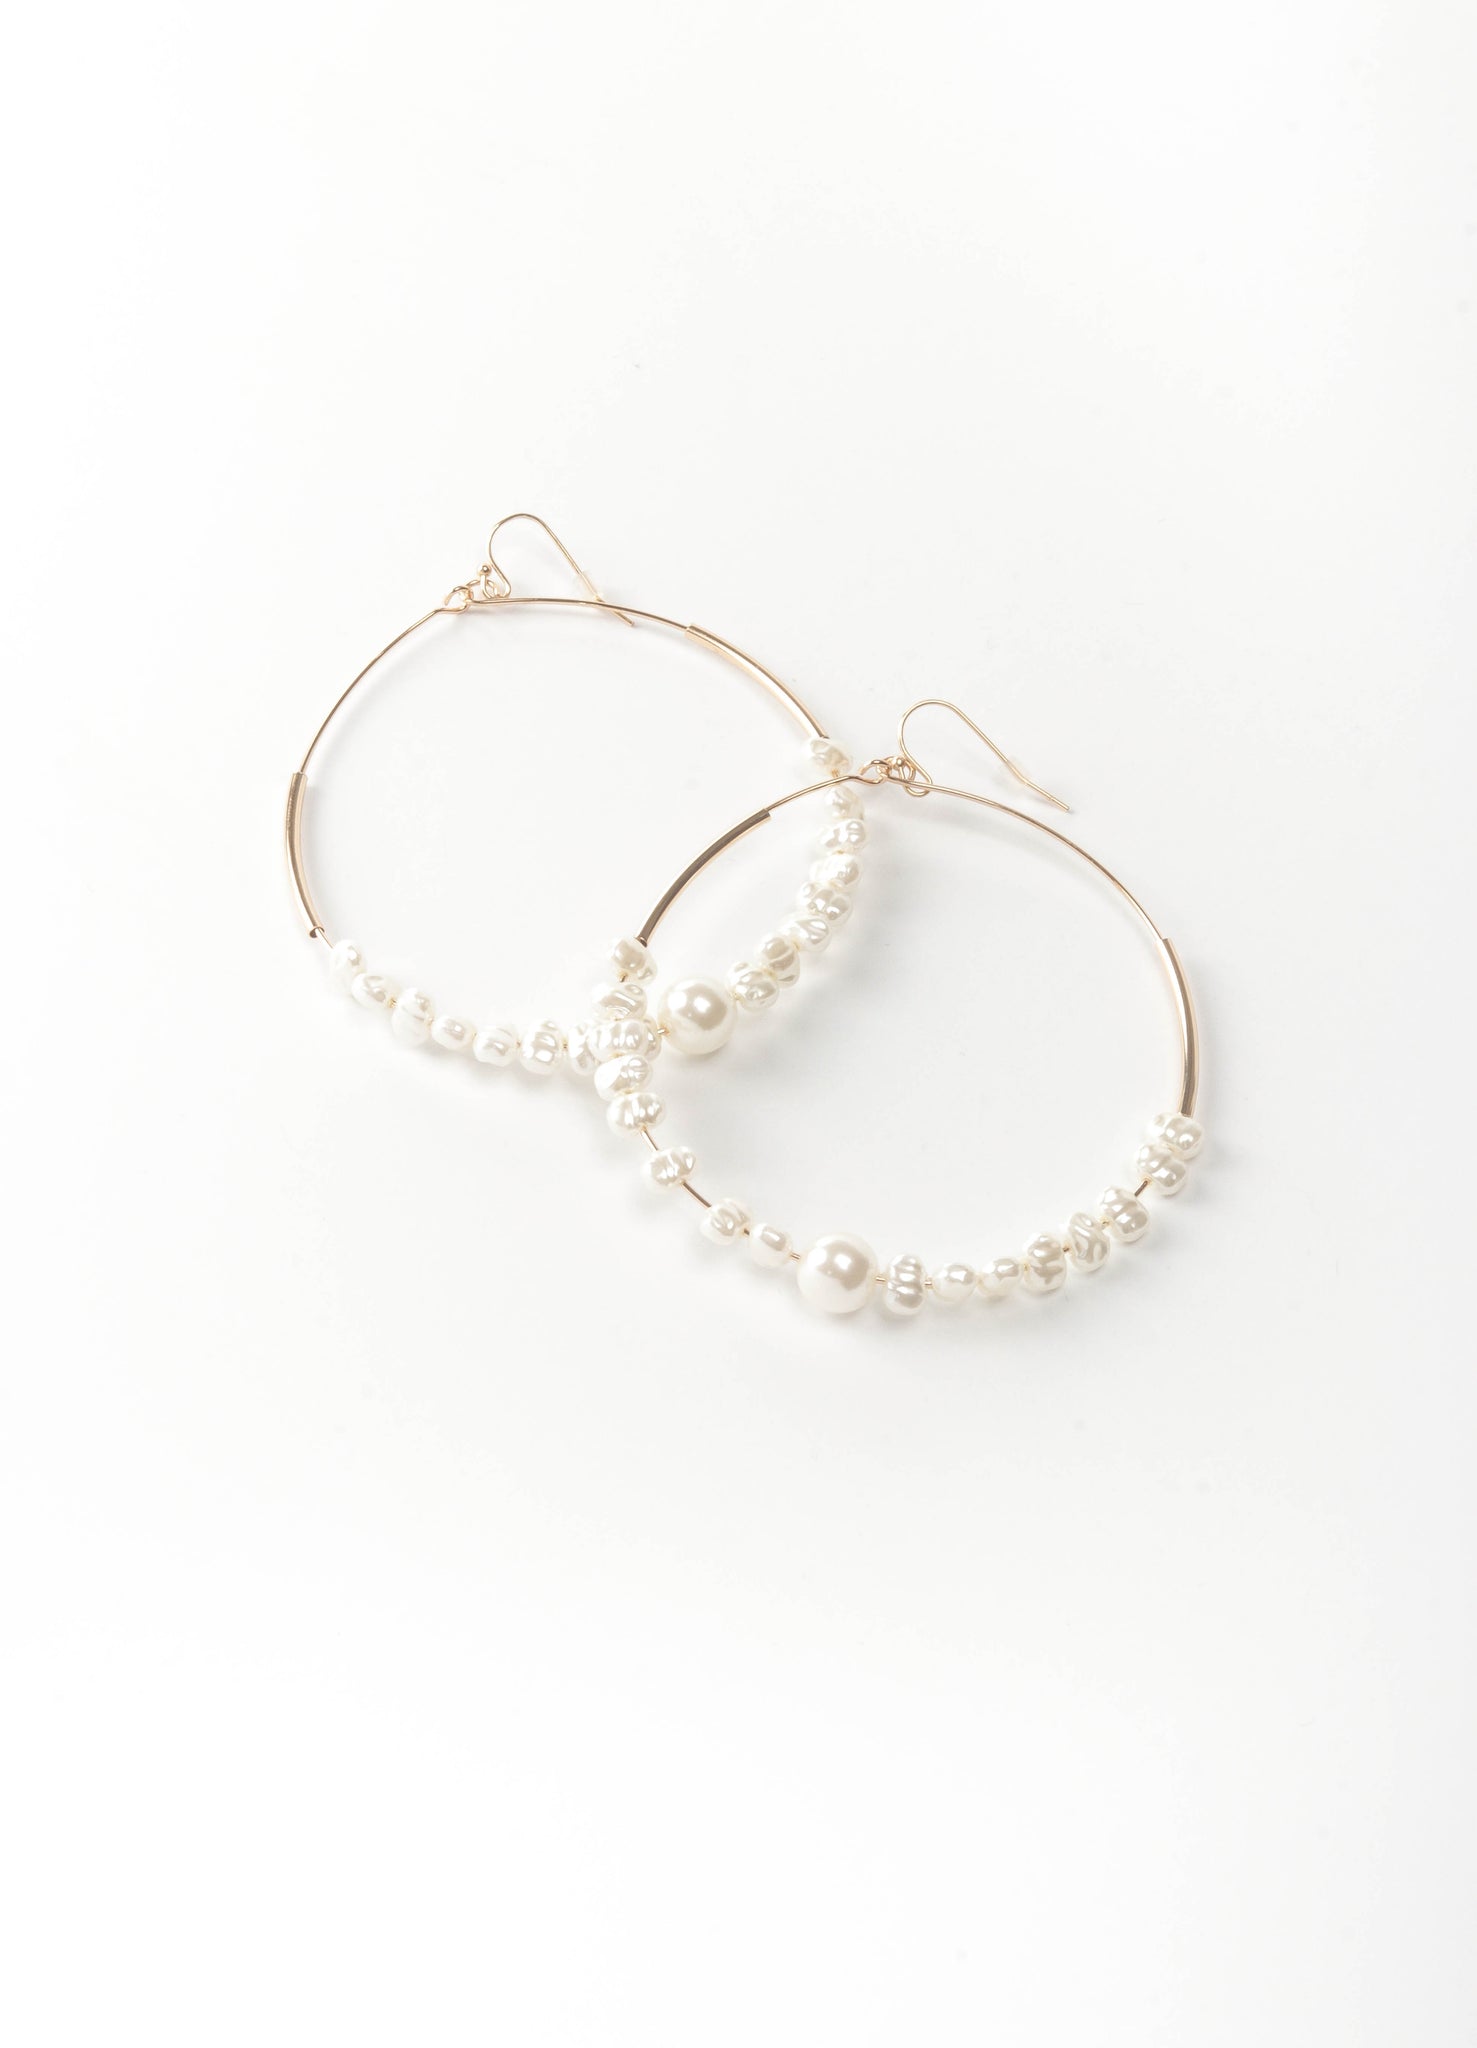 Gold hoops earrings with pearls 